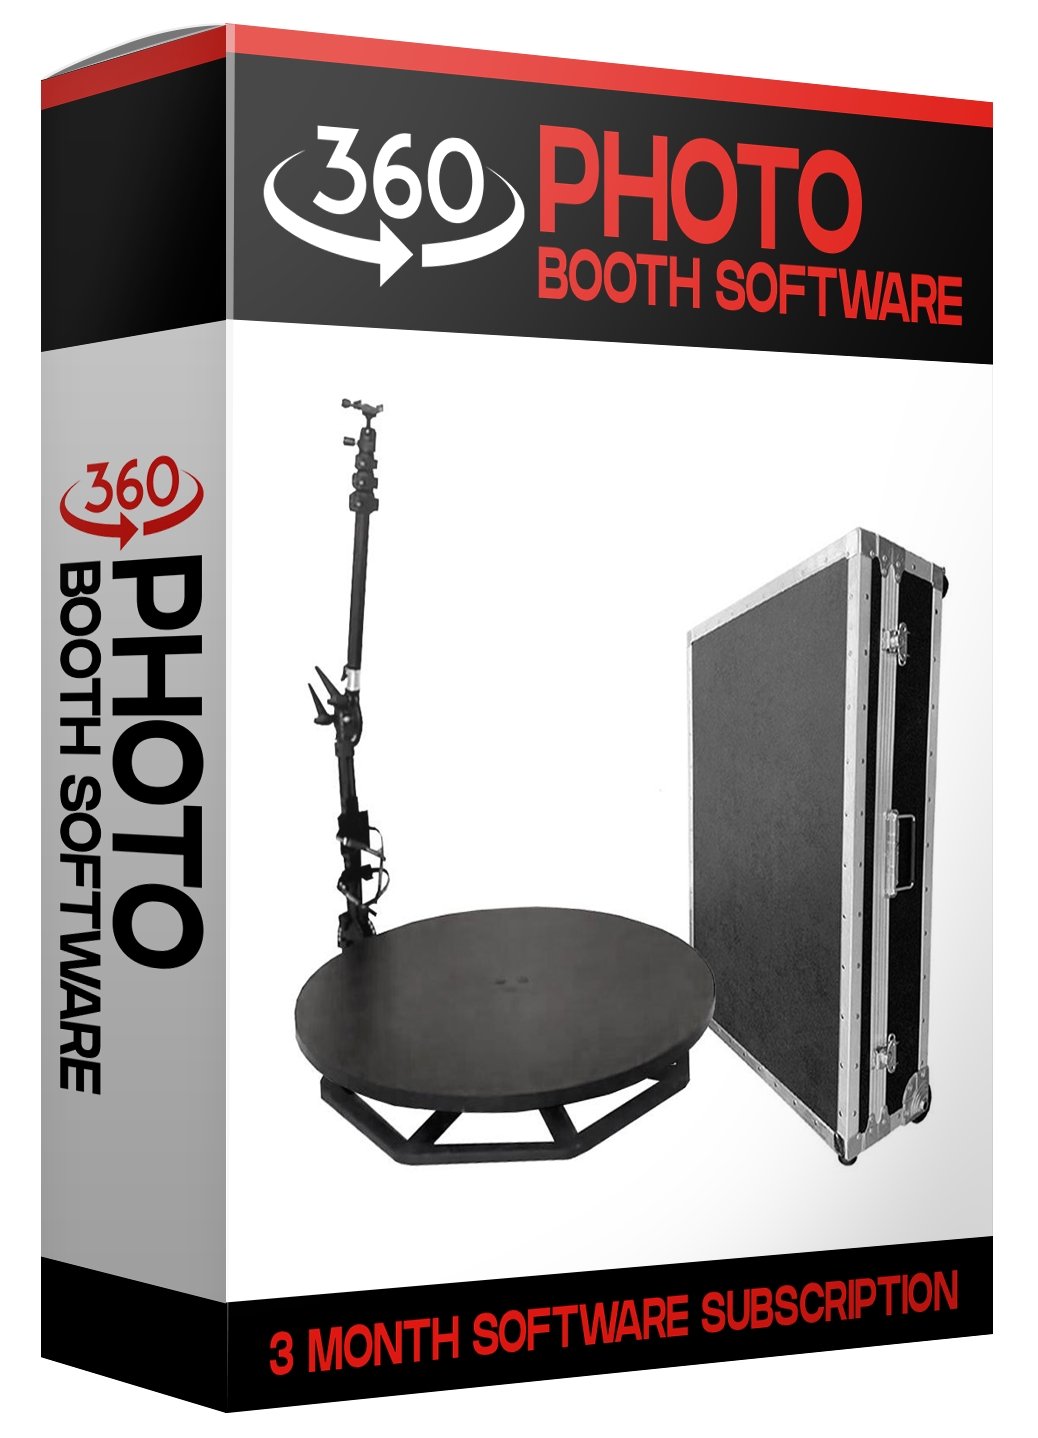 REVOSPIN OM-4 OCTAGON 360 PHOTO BOOTH PREMIUM PACKAGE (MANUAL SPIN) - VS Booths 360